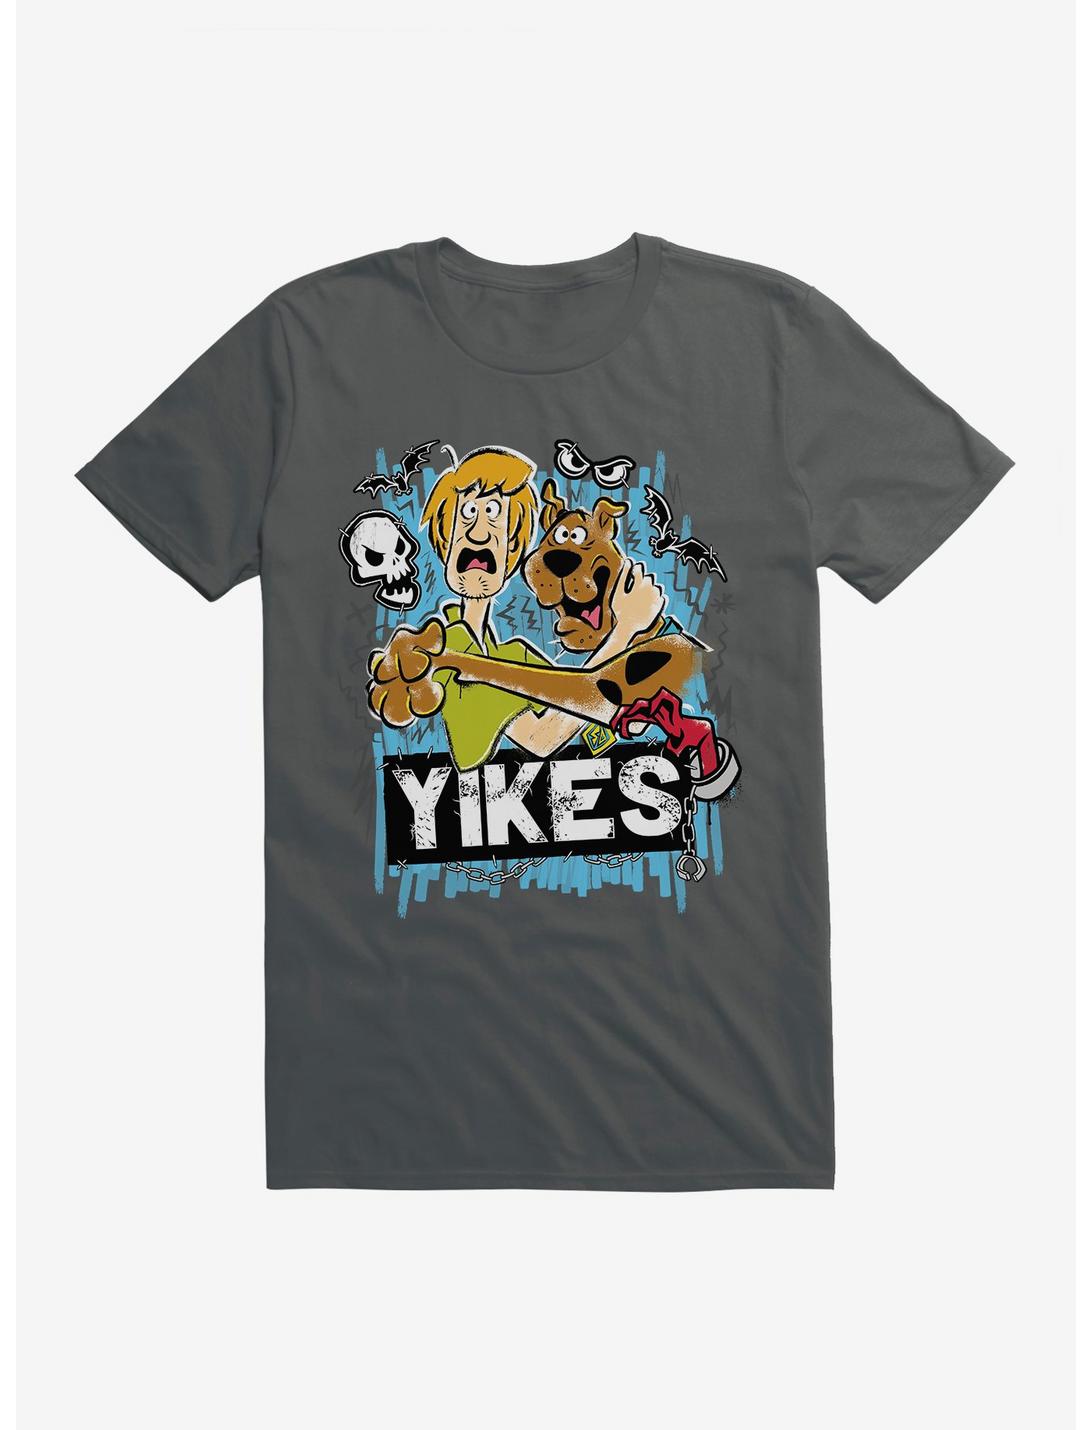 Scooby-Doo Yikes With Shaggy T-Shirt, CHARCOAL, hi-res